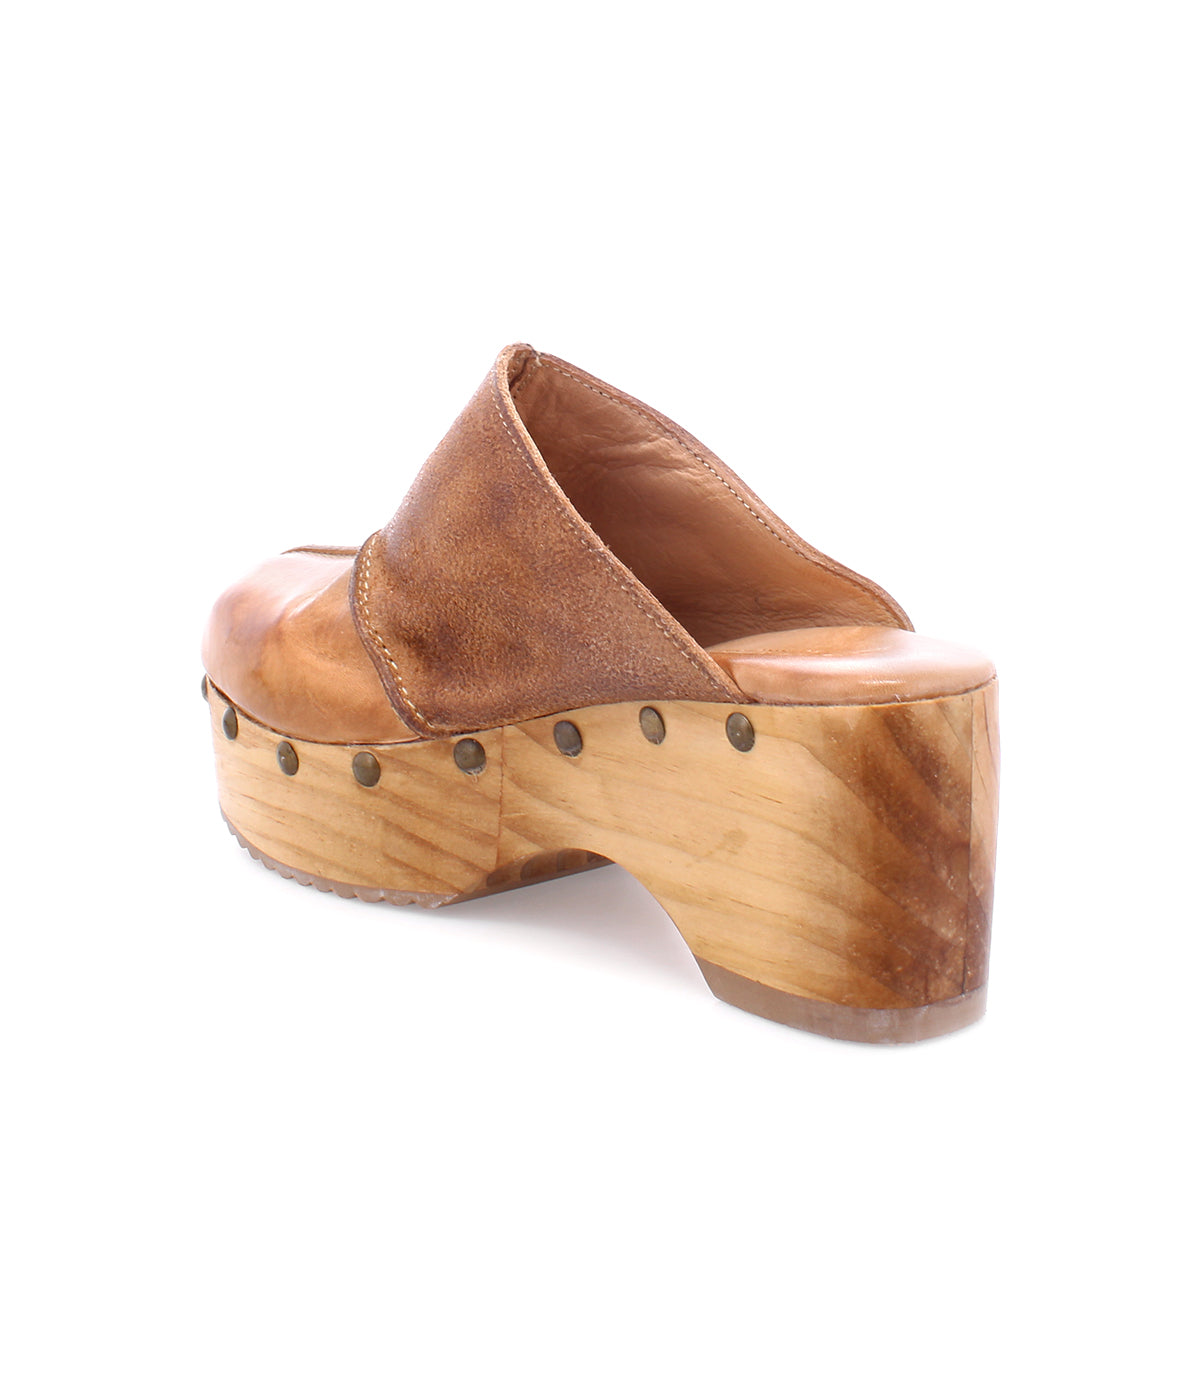 An eco-friendly women's wooden clog with a Mista wooden heel made of Chilean wood by Bed Stu.